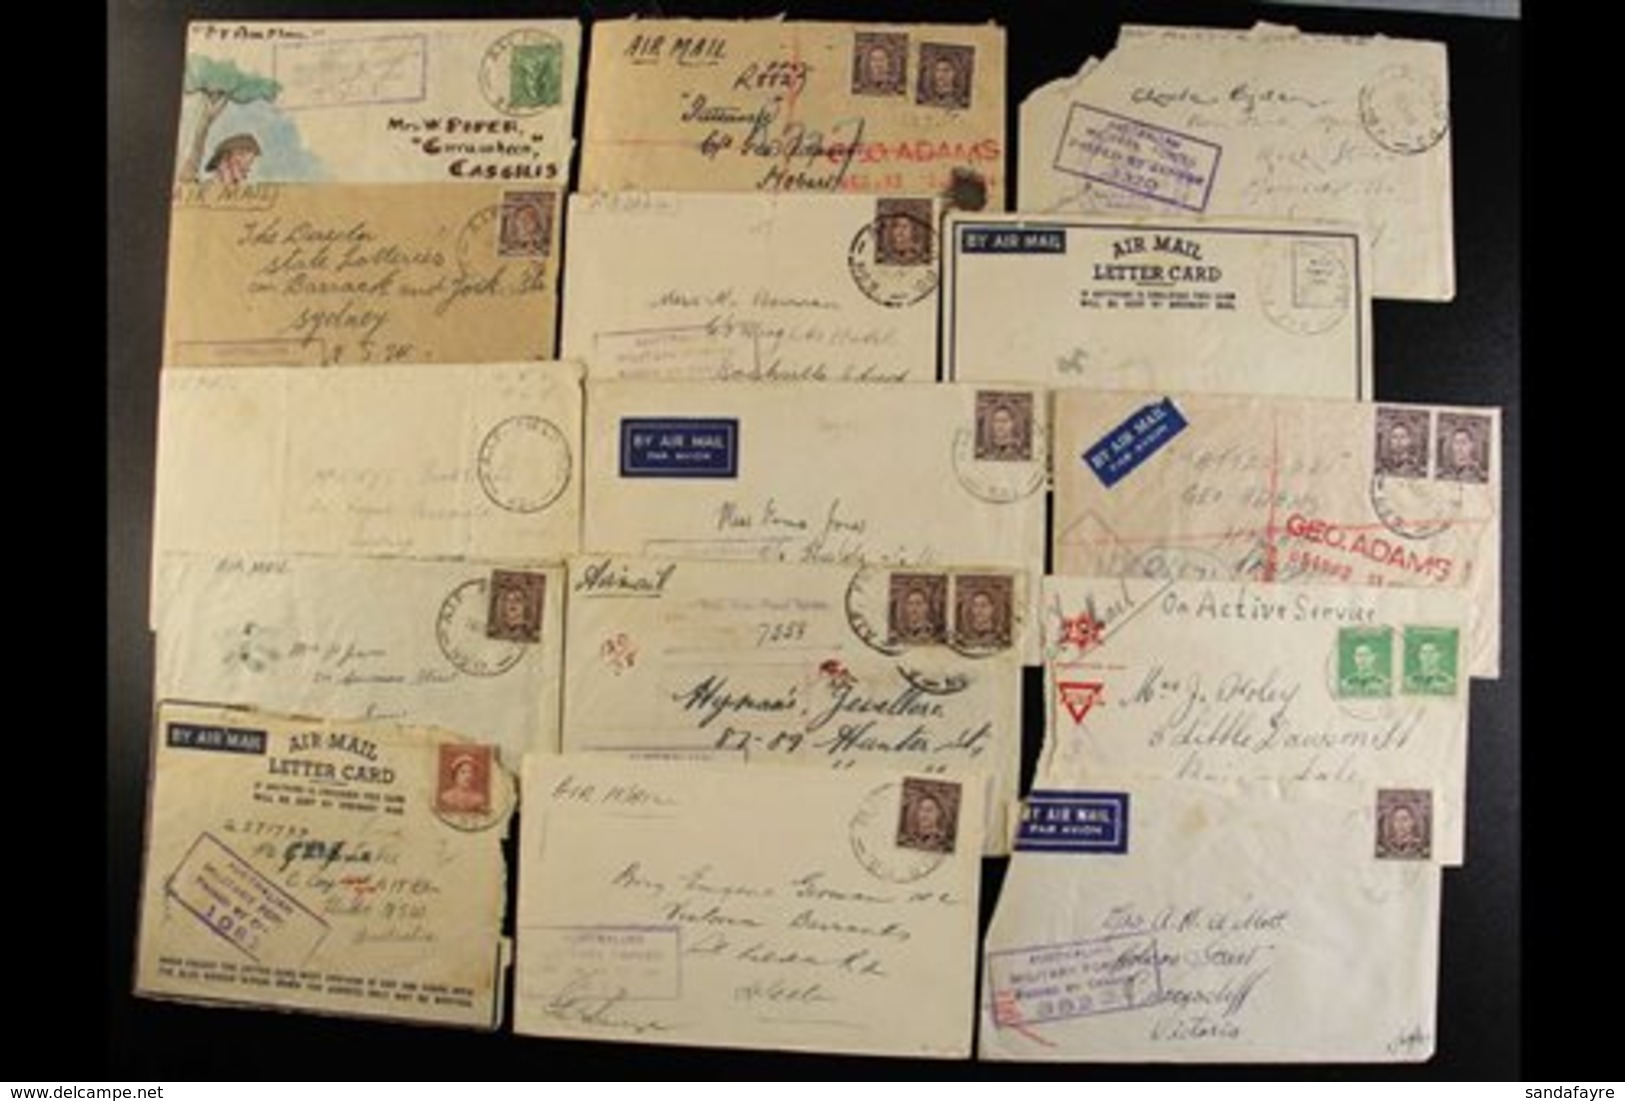 WW2 AUSTRALIAN FORCES - A.I.F. FIELD P.O. DATESTAMPS  A Fine Collection Of Covers (couple Of Fronts) Back To Australia,  - Papua New Guinea